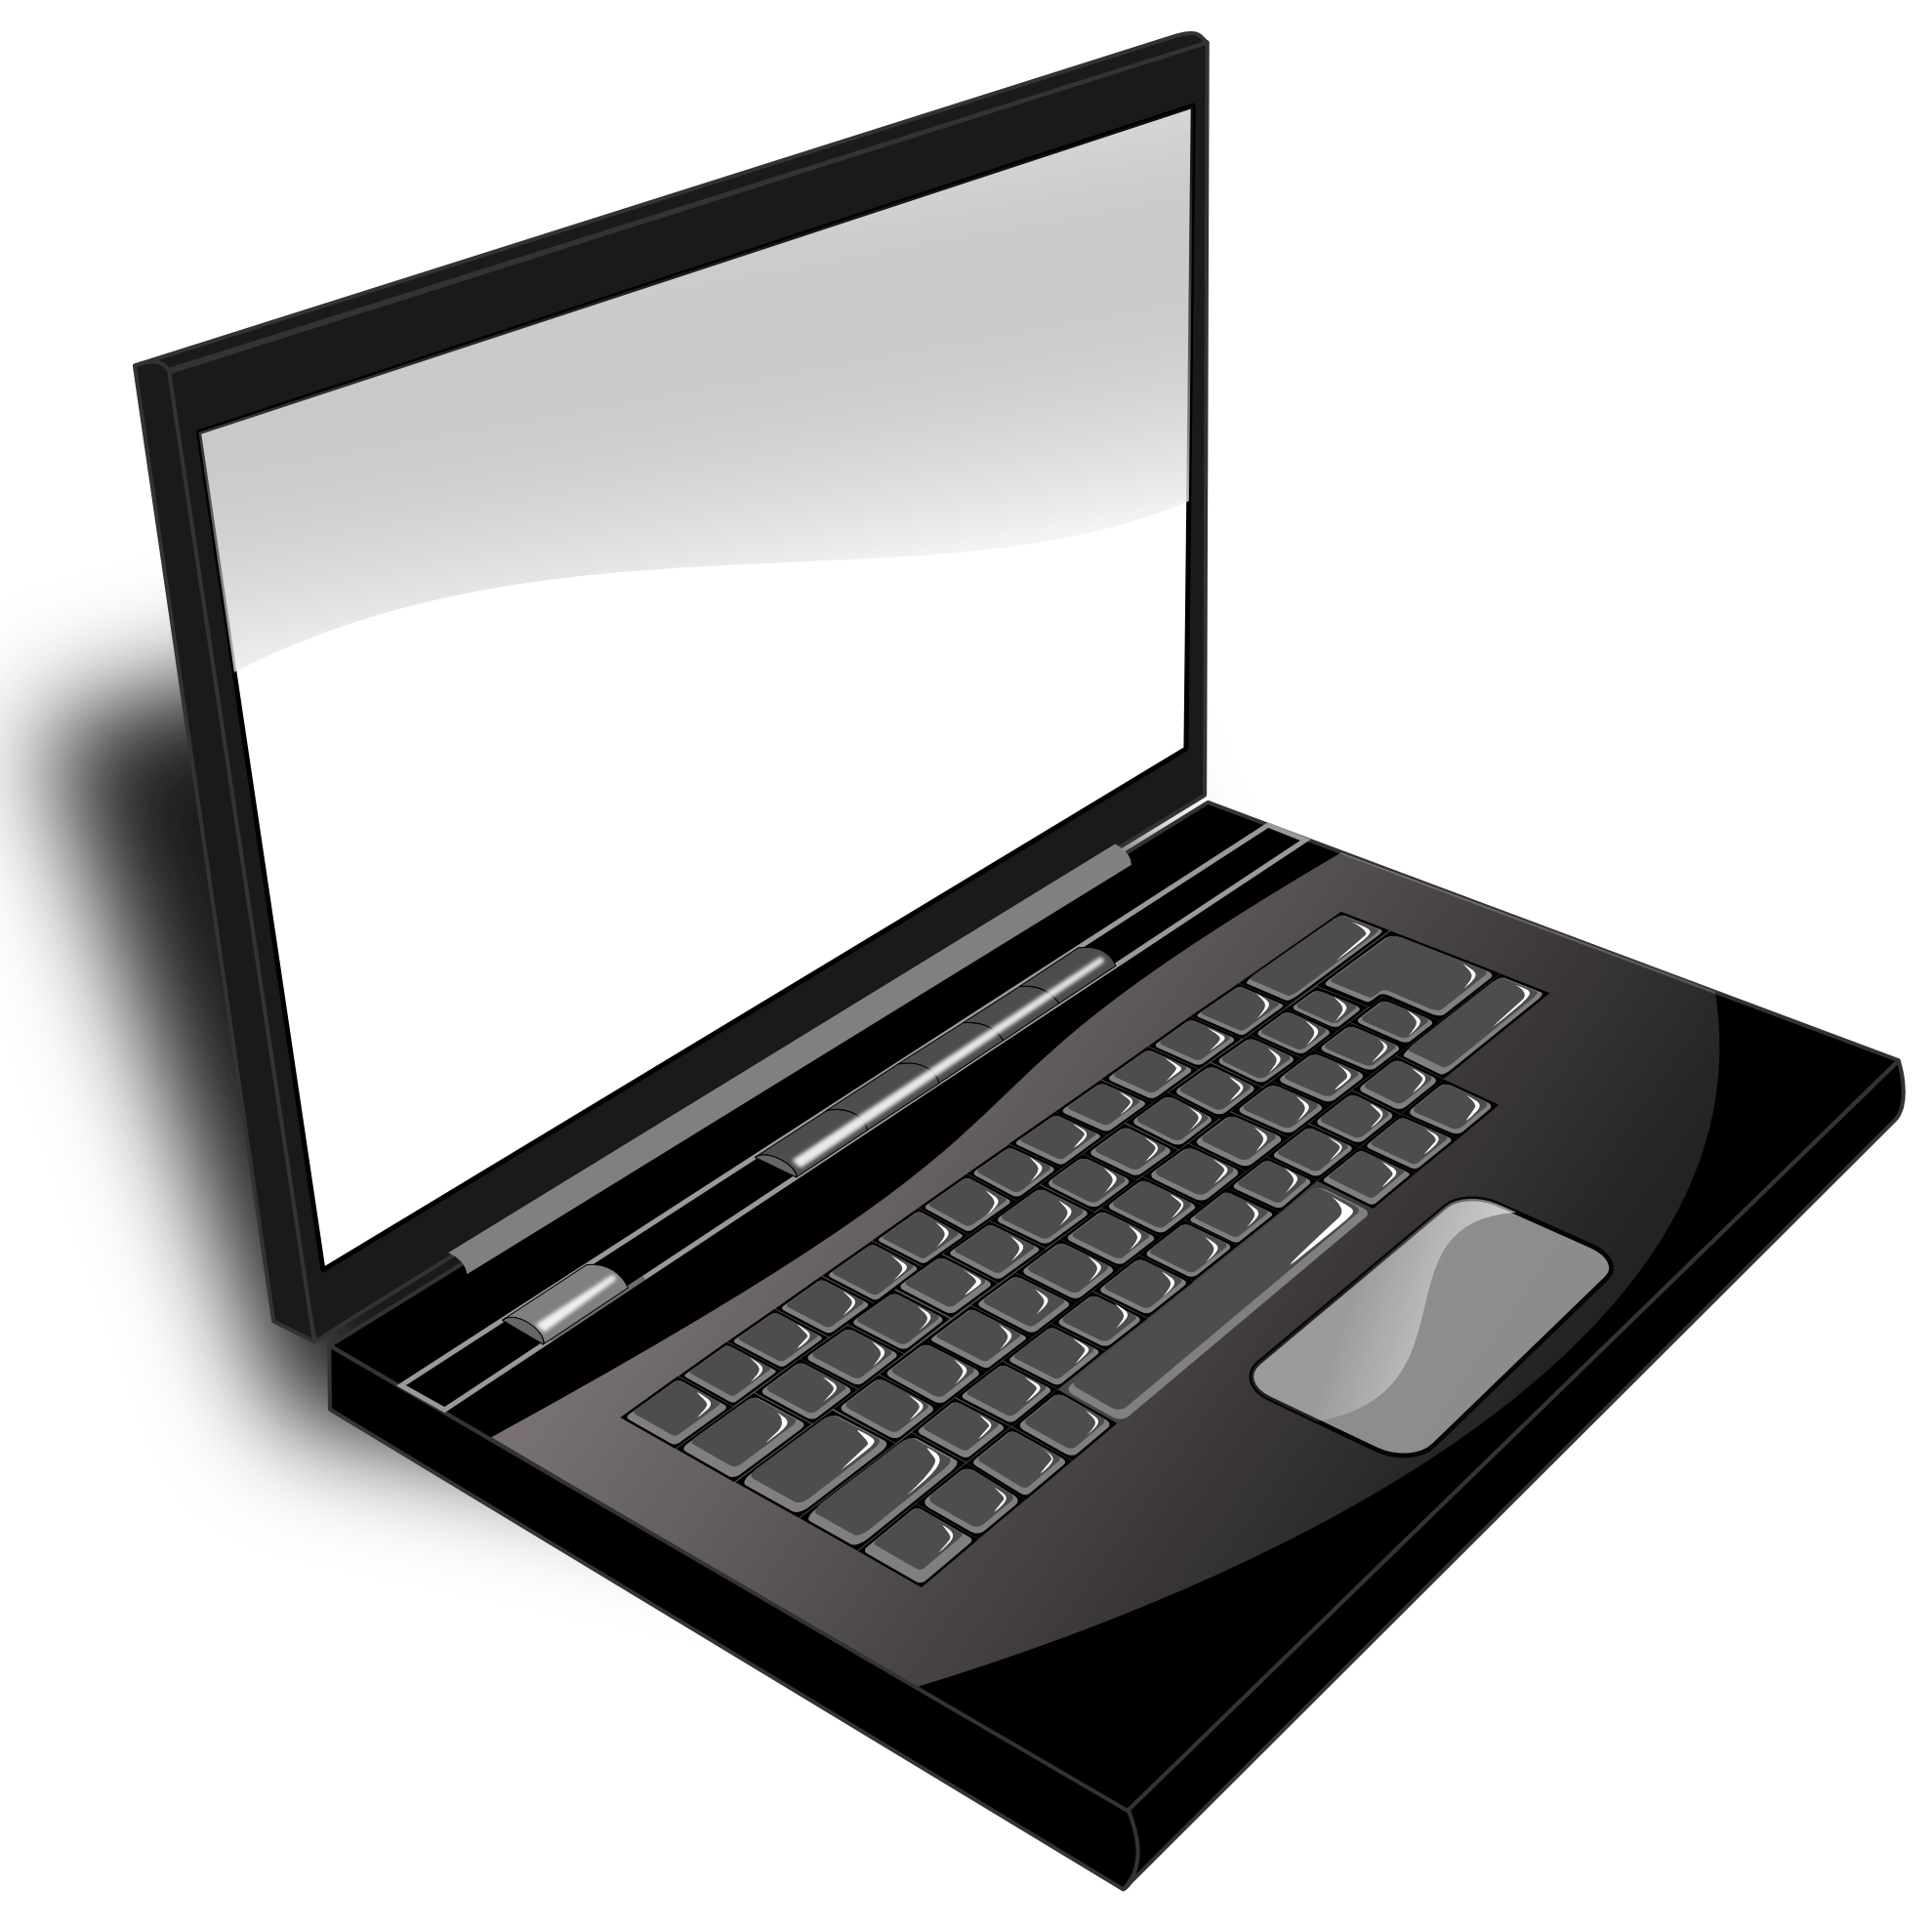 Computer  black and white computer clipart black and white free images 2 wikiclipart